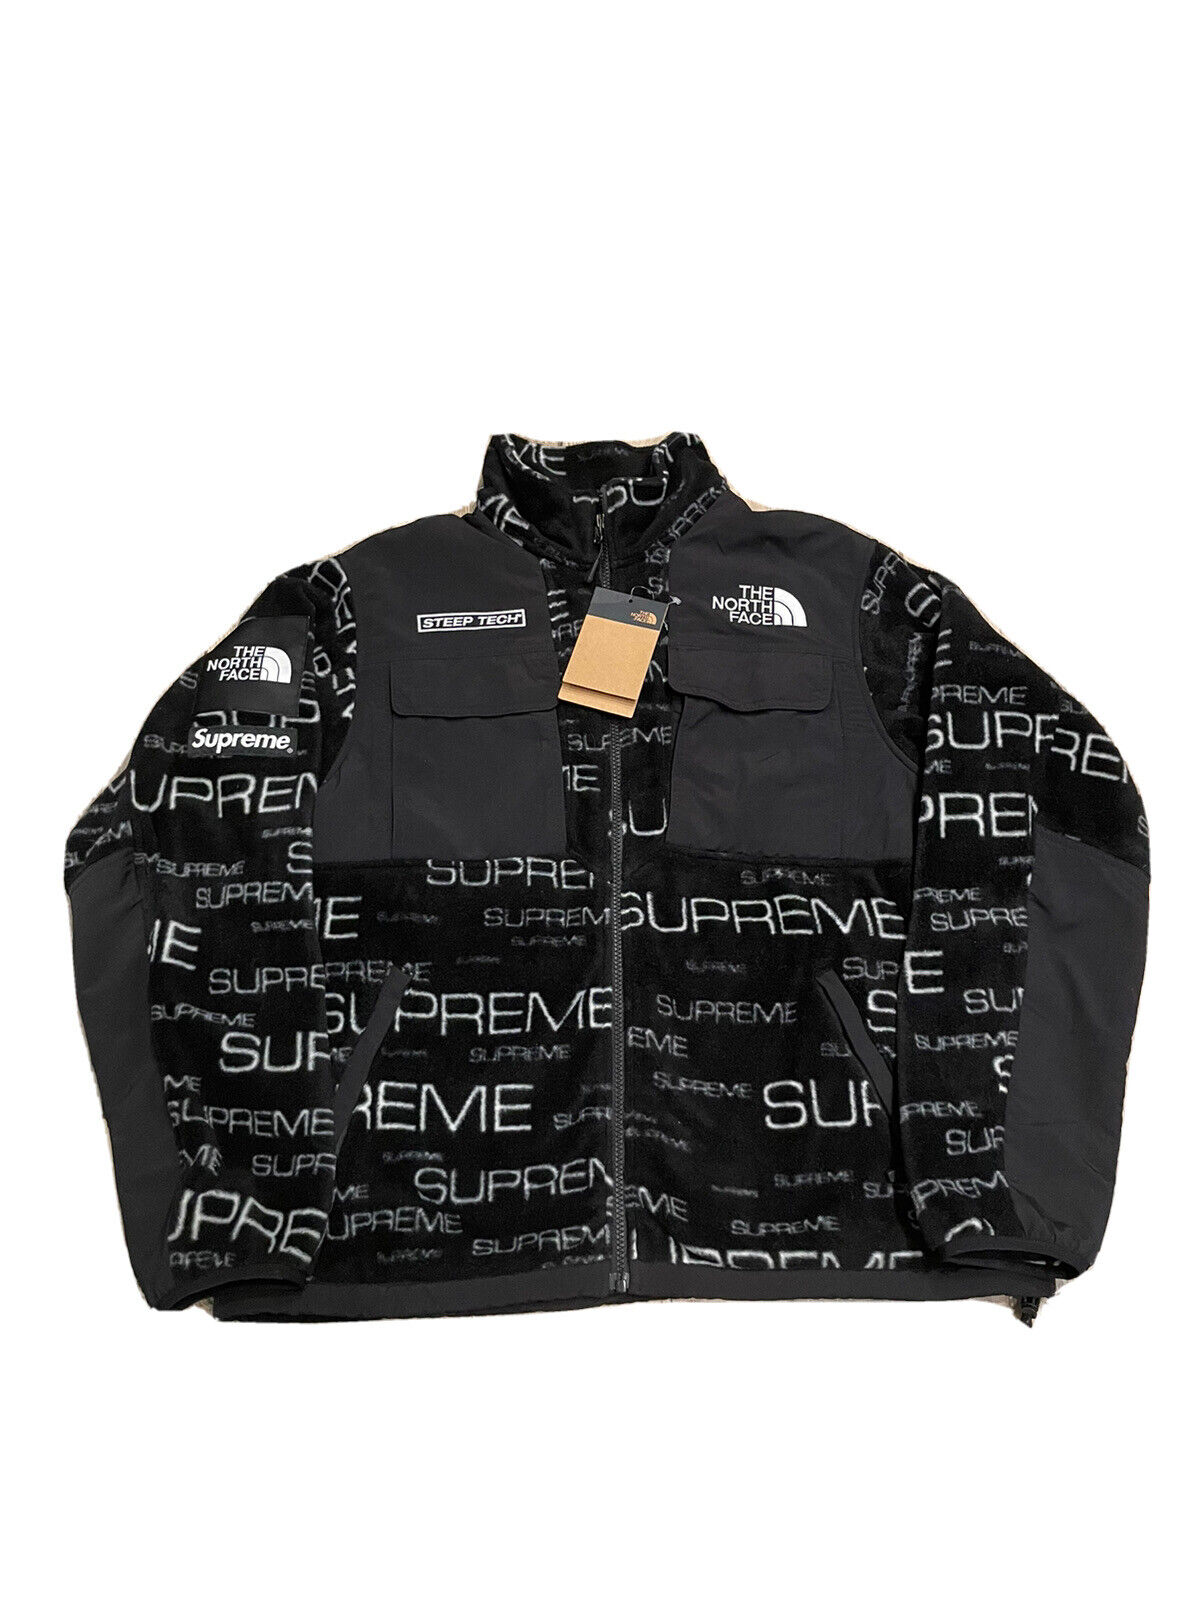 Supreme x The North Face Steep Tech Apogee Jacket - White size L 